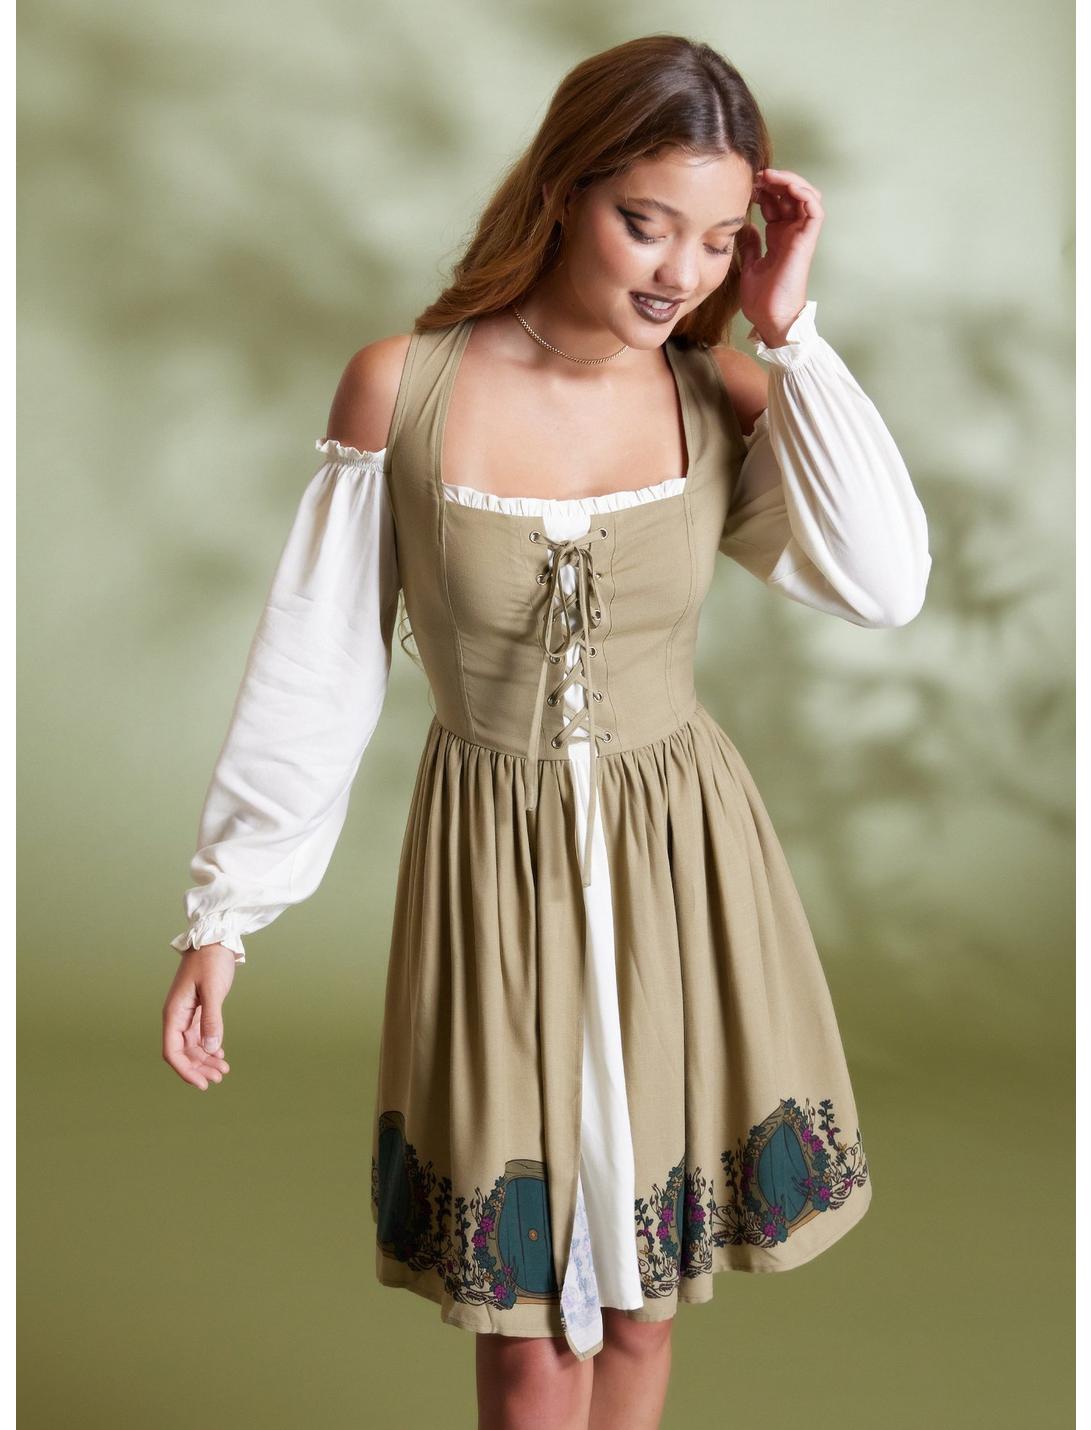 The Lord Of The Rings Hobbit Cold Shoulder Dress, MULTI, hi-res